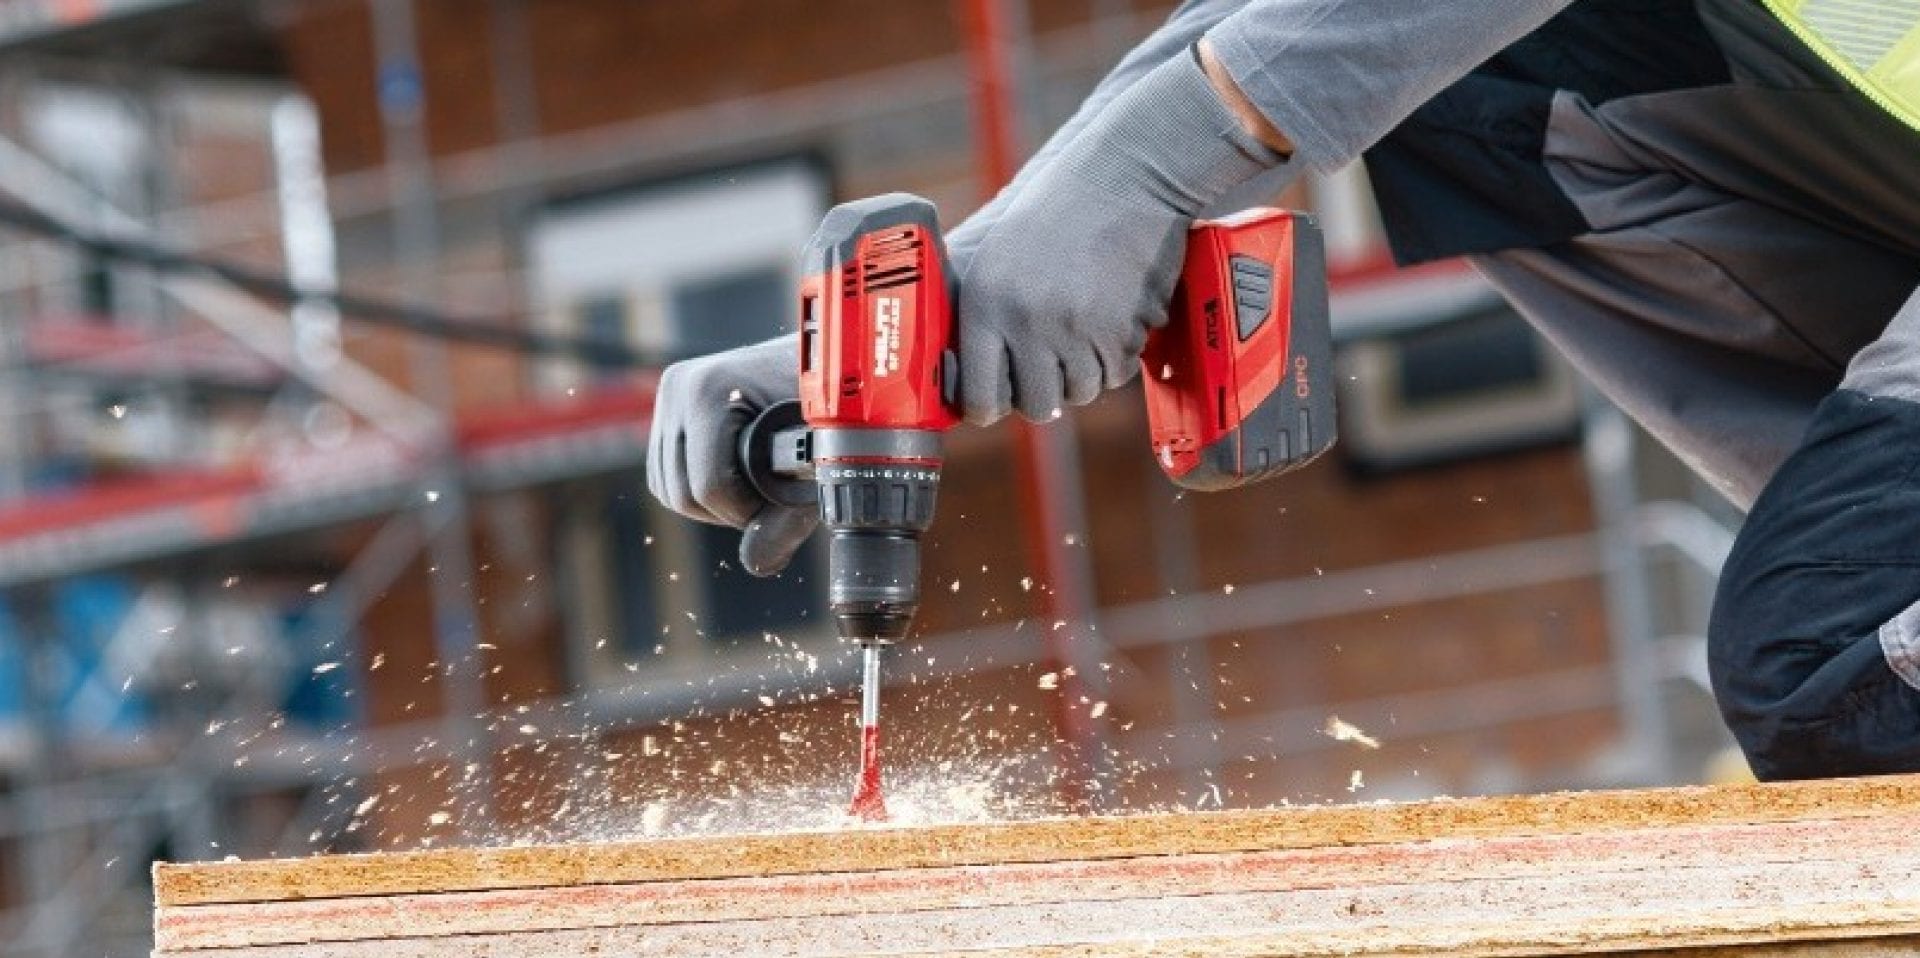 How cordless tools can save time for Australian tradies